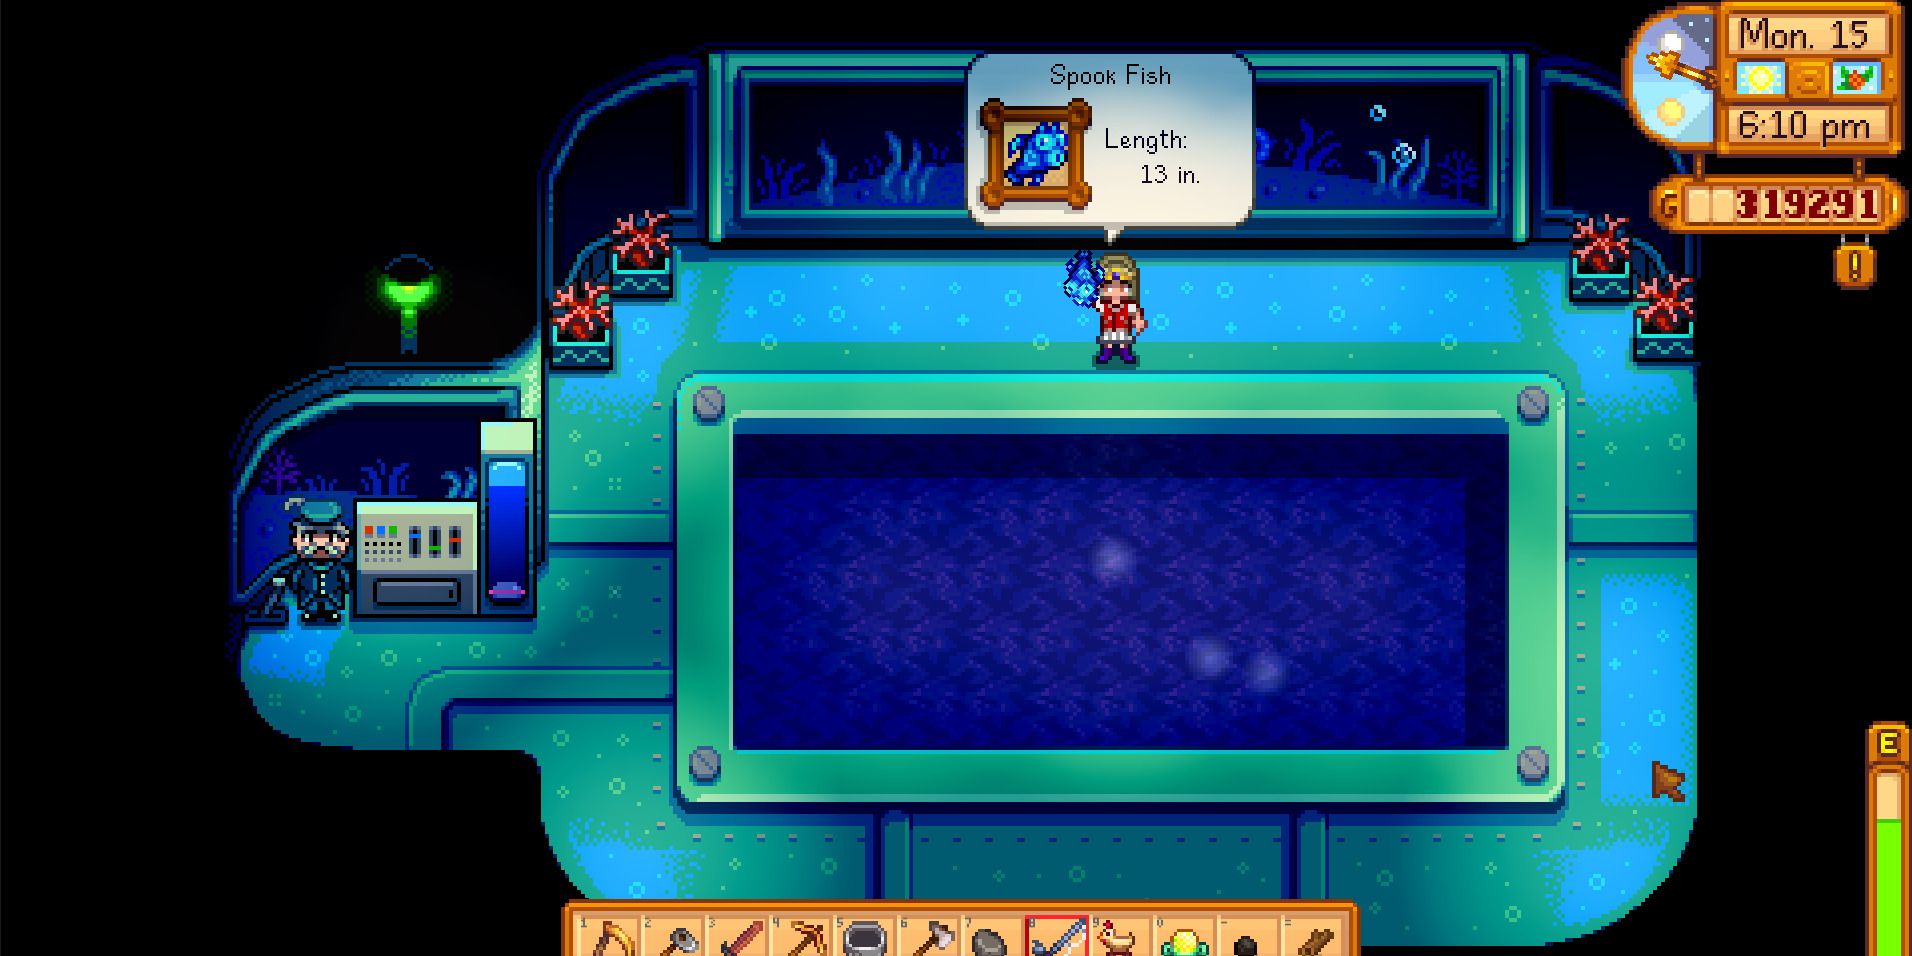 Image of a character catching a Spook Fish in the Night Market submarine in Stardew Valley